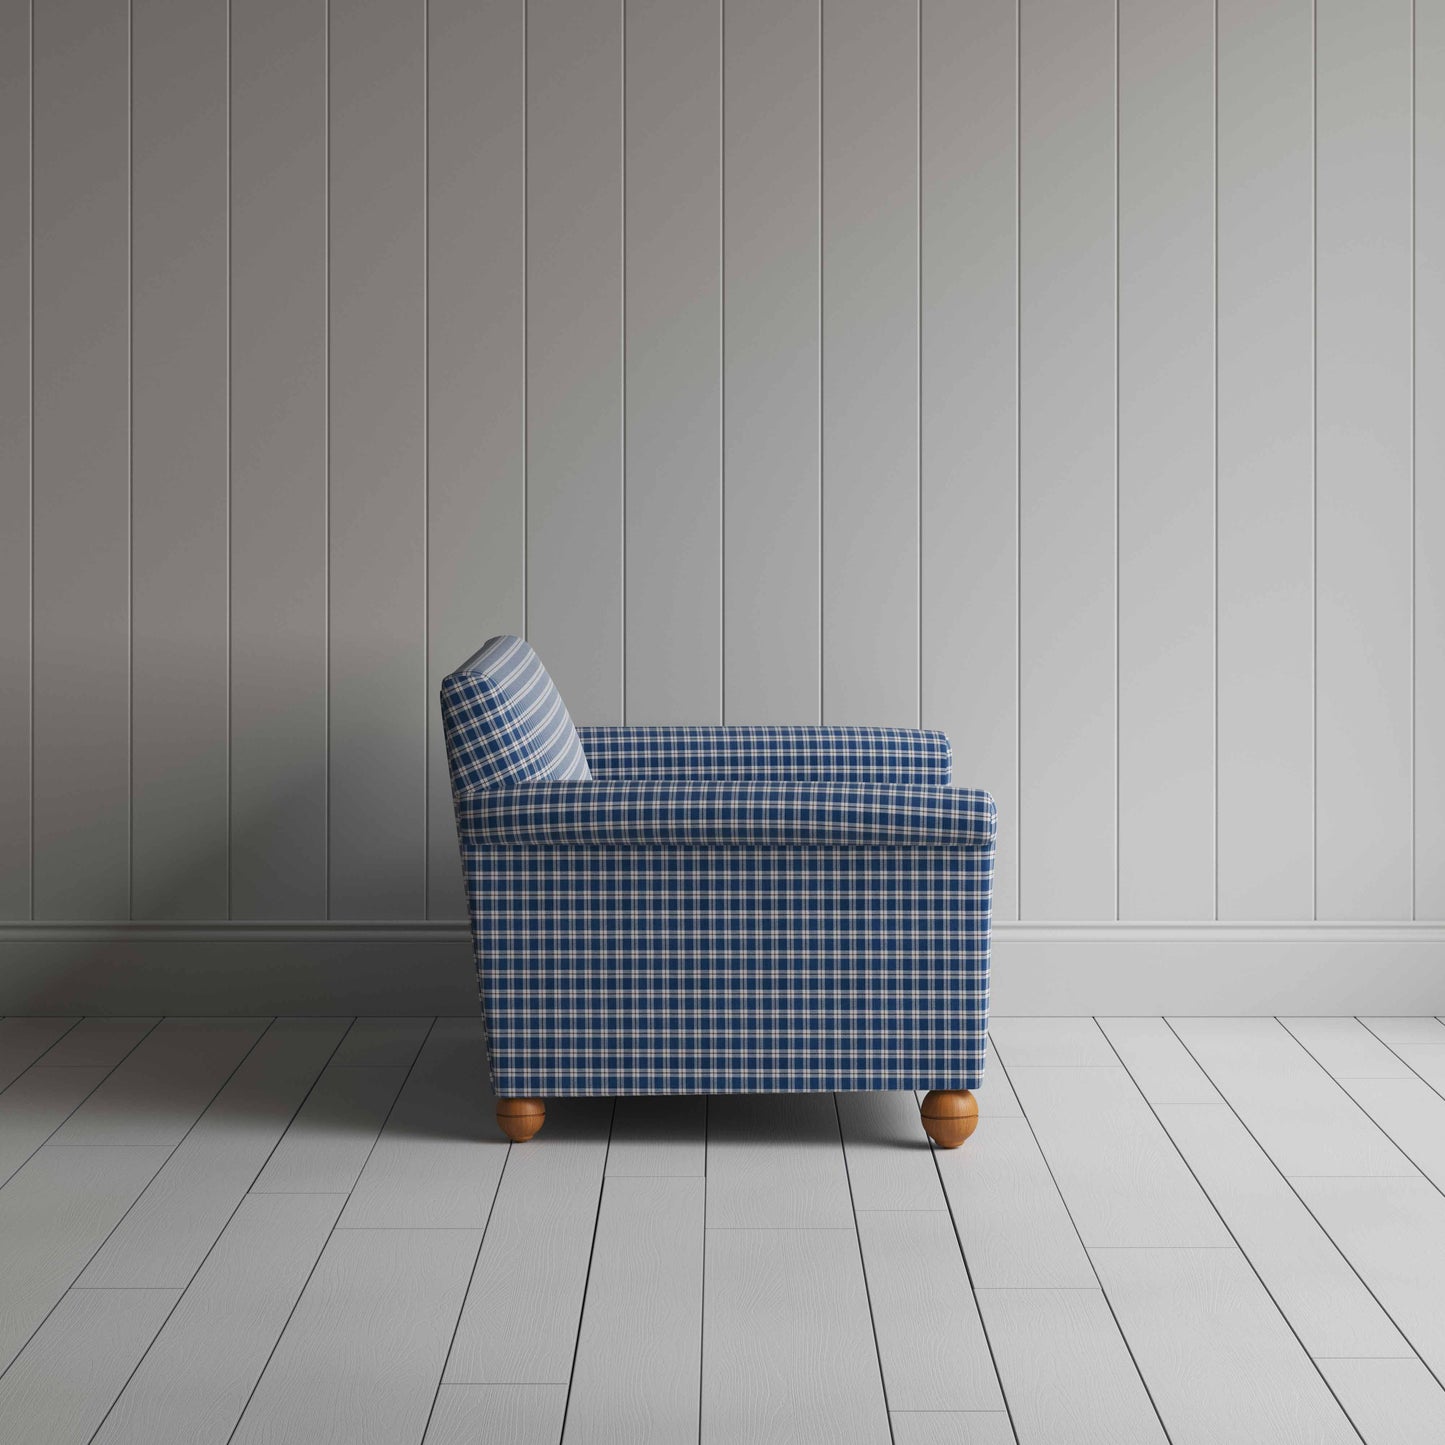 Idler 2 Seater Sofa in Well Plaid Cotton, Blue Brown